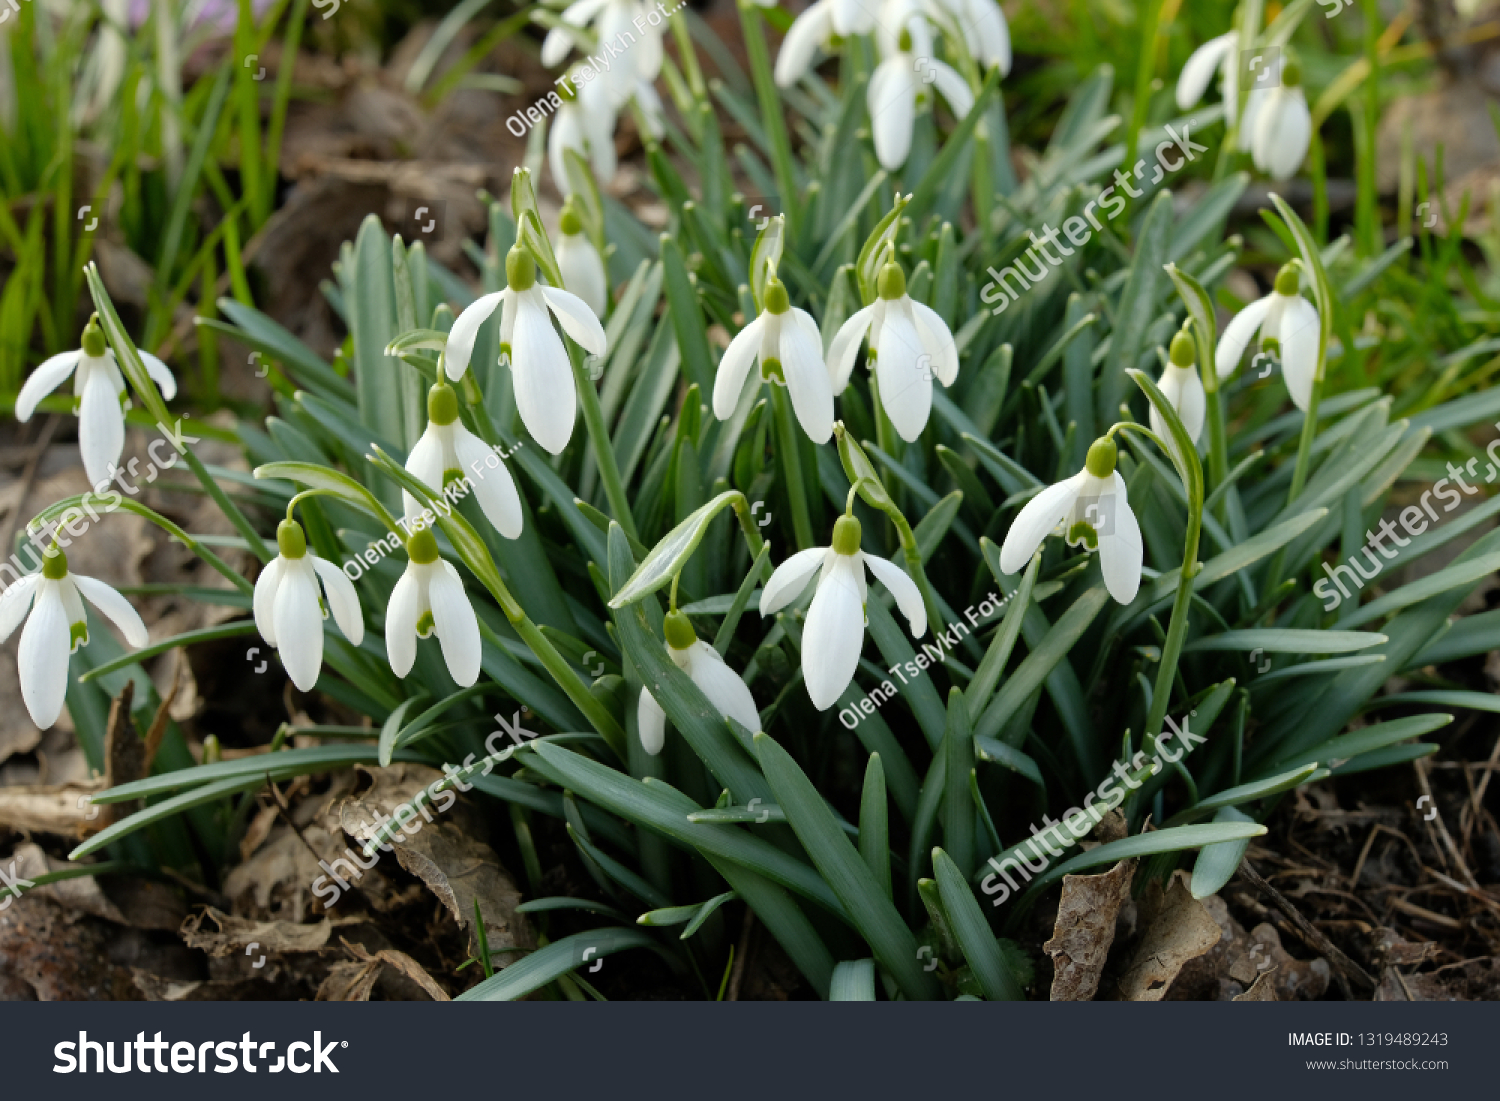 White spring snowdrops. Snowdrops field. Galanthus nivalis. Snowdrop spring flowers. Snowdrop or Galanthus. Spring flower snowdrop is the first flower in the end of winter and the beginning of spring. #1319489243